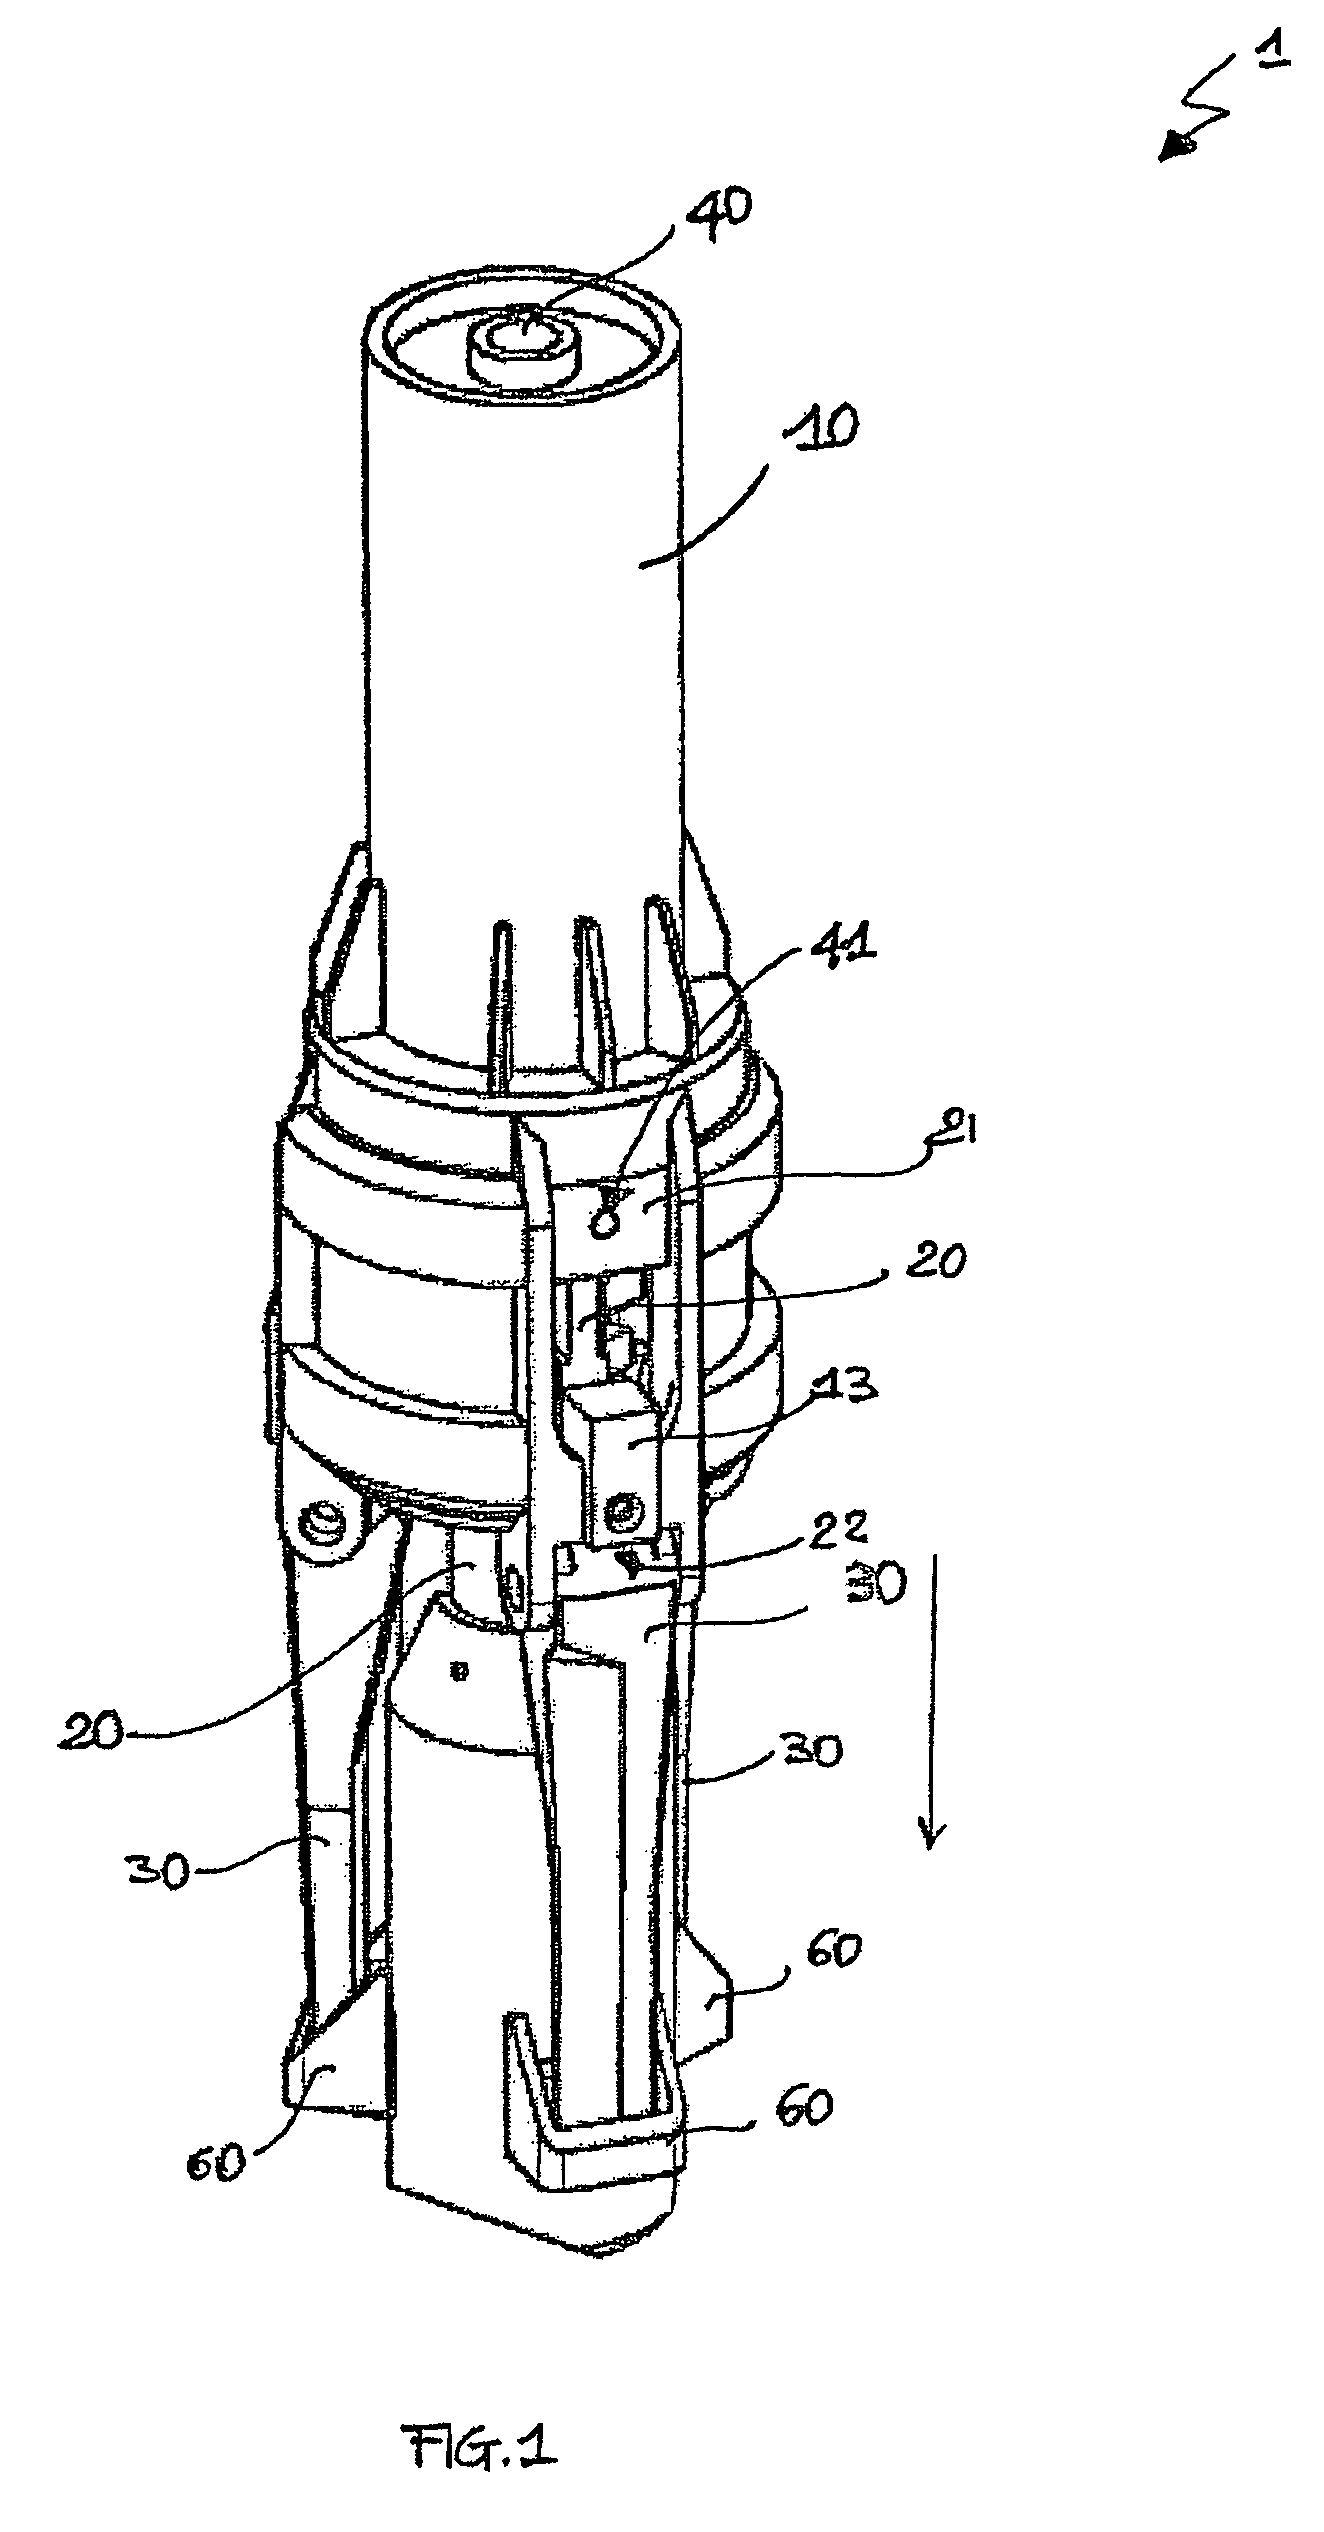 Device for consolidating soils by means of mechanical mixing and injection of consolidating fluids